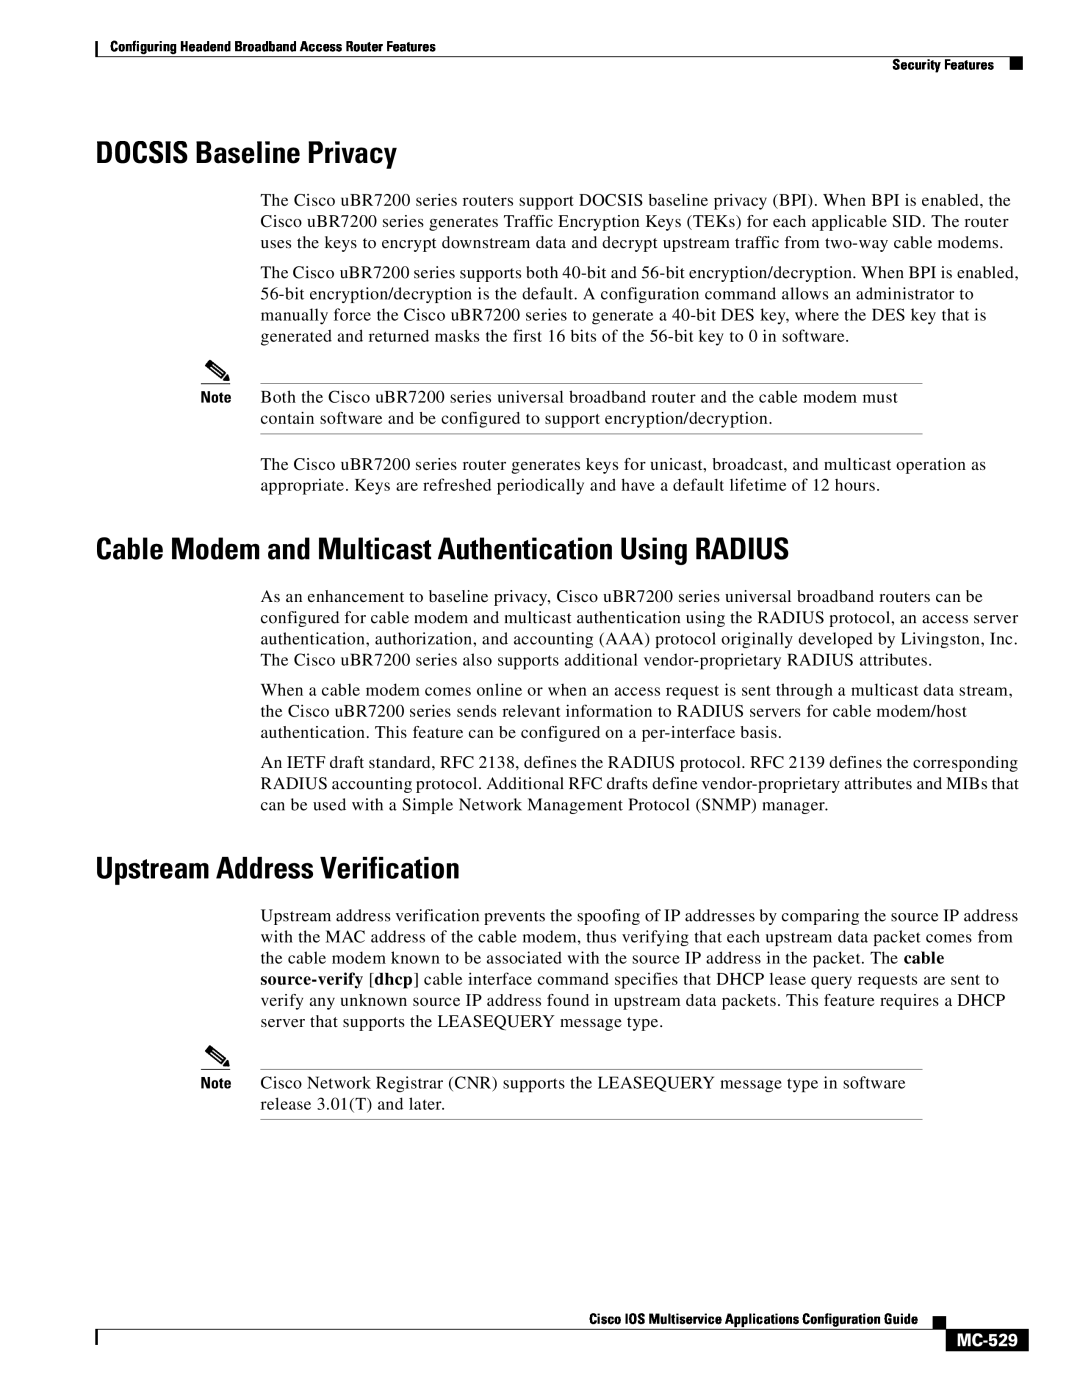 Cisco Systems uBR7200 manual DOCSIS Baseline Privacy, Cable Modem and Multicast Authentication Using RADIUS, MC-529 